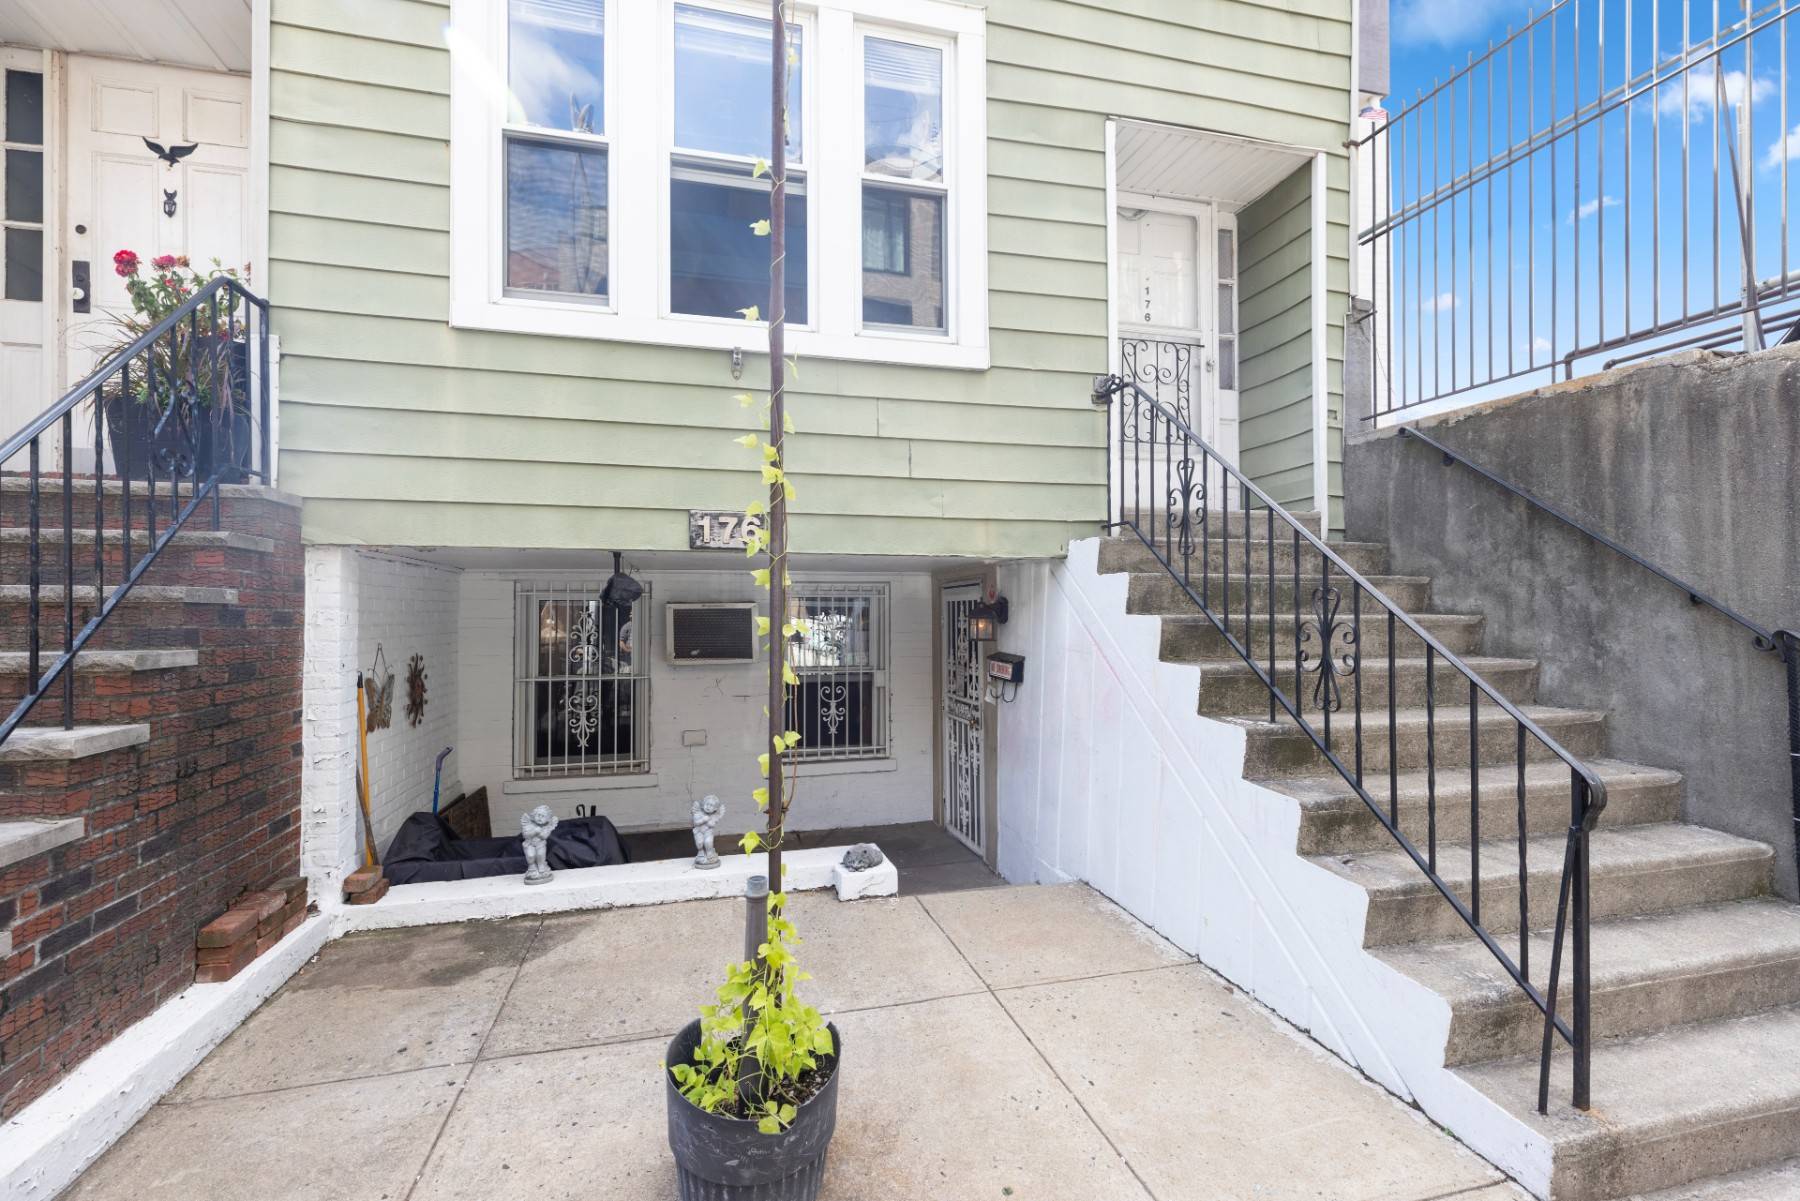 A single family home for less than the price of a condo in South Slope Greenwood Heights !